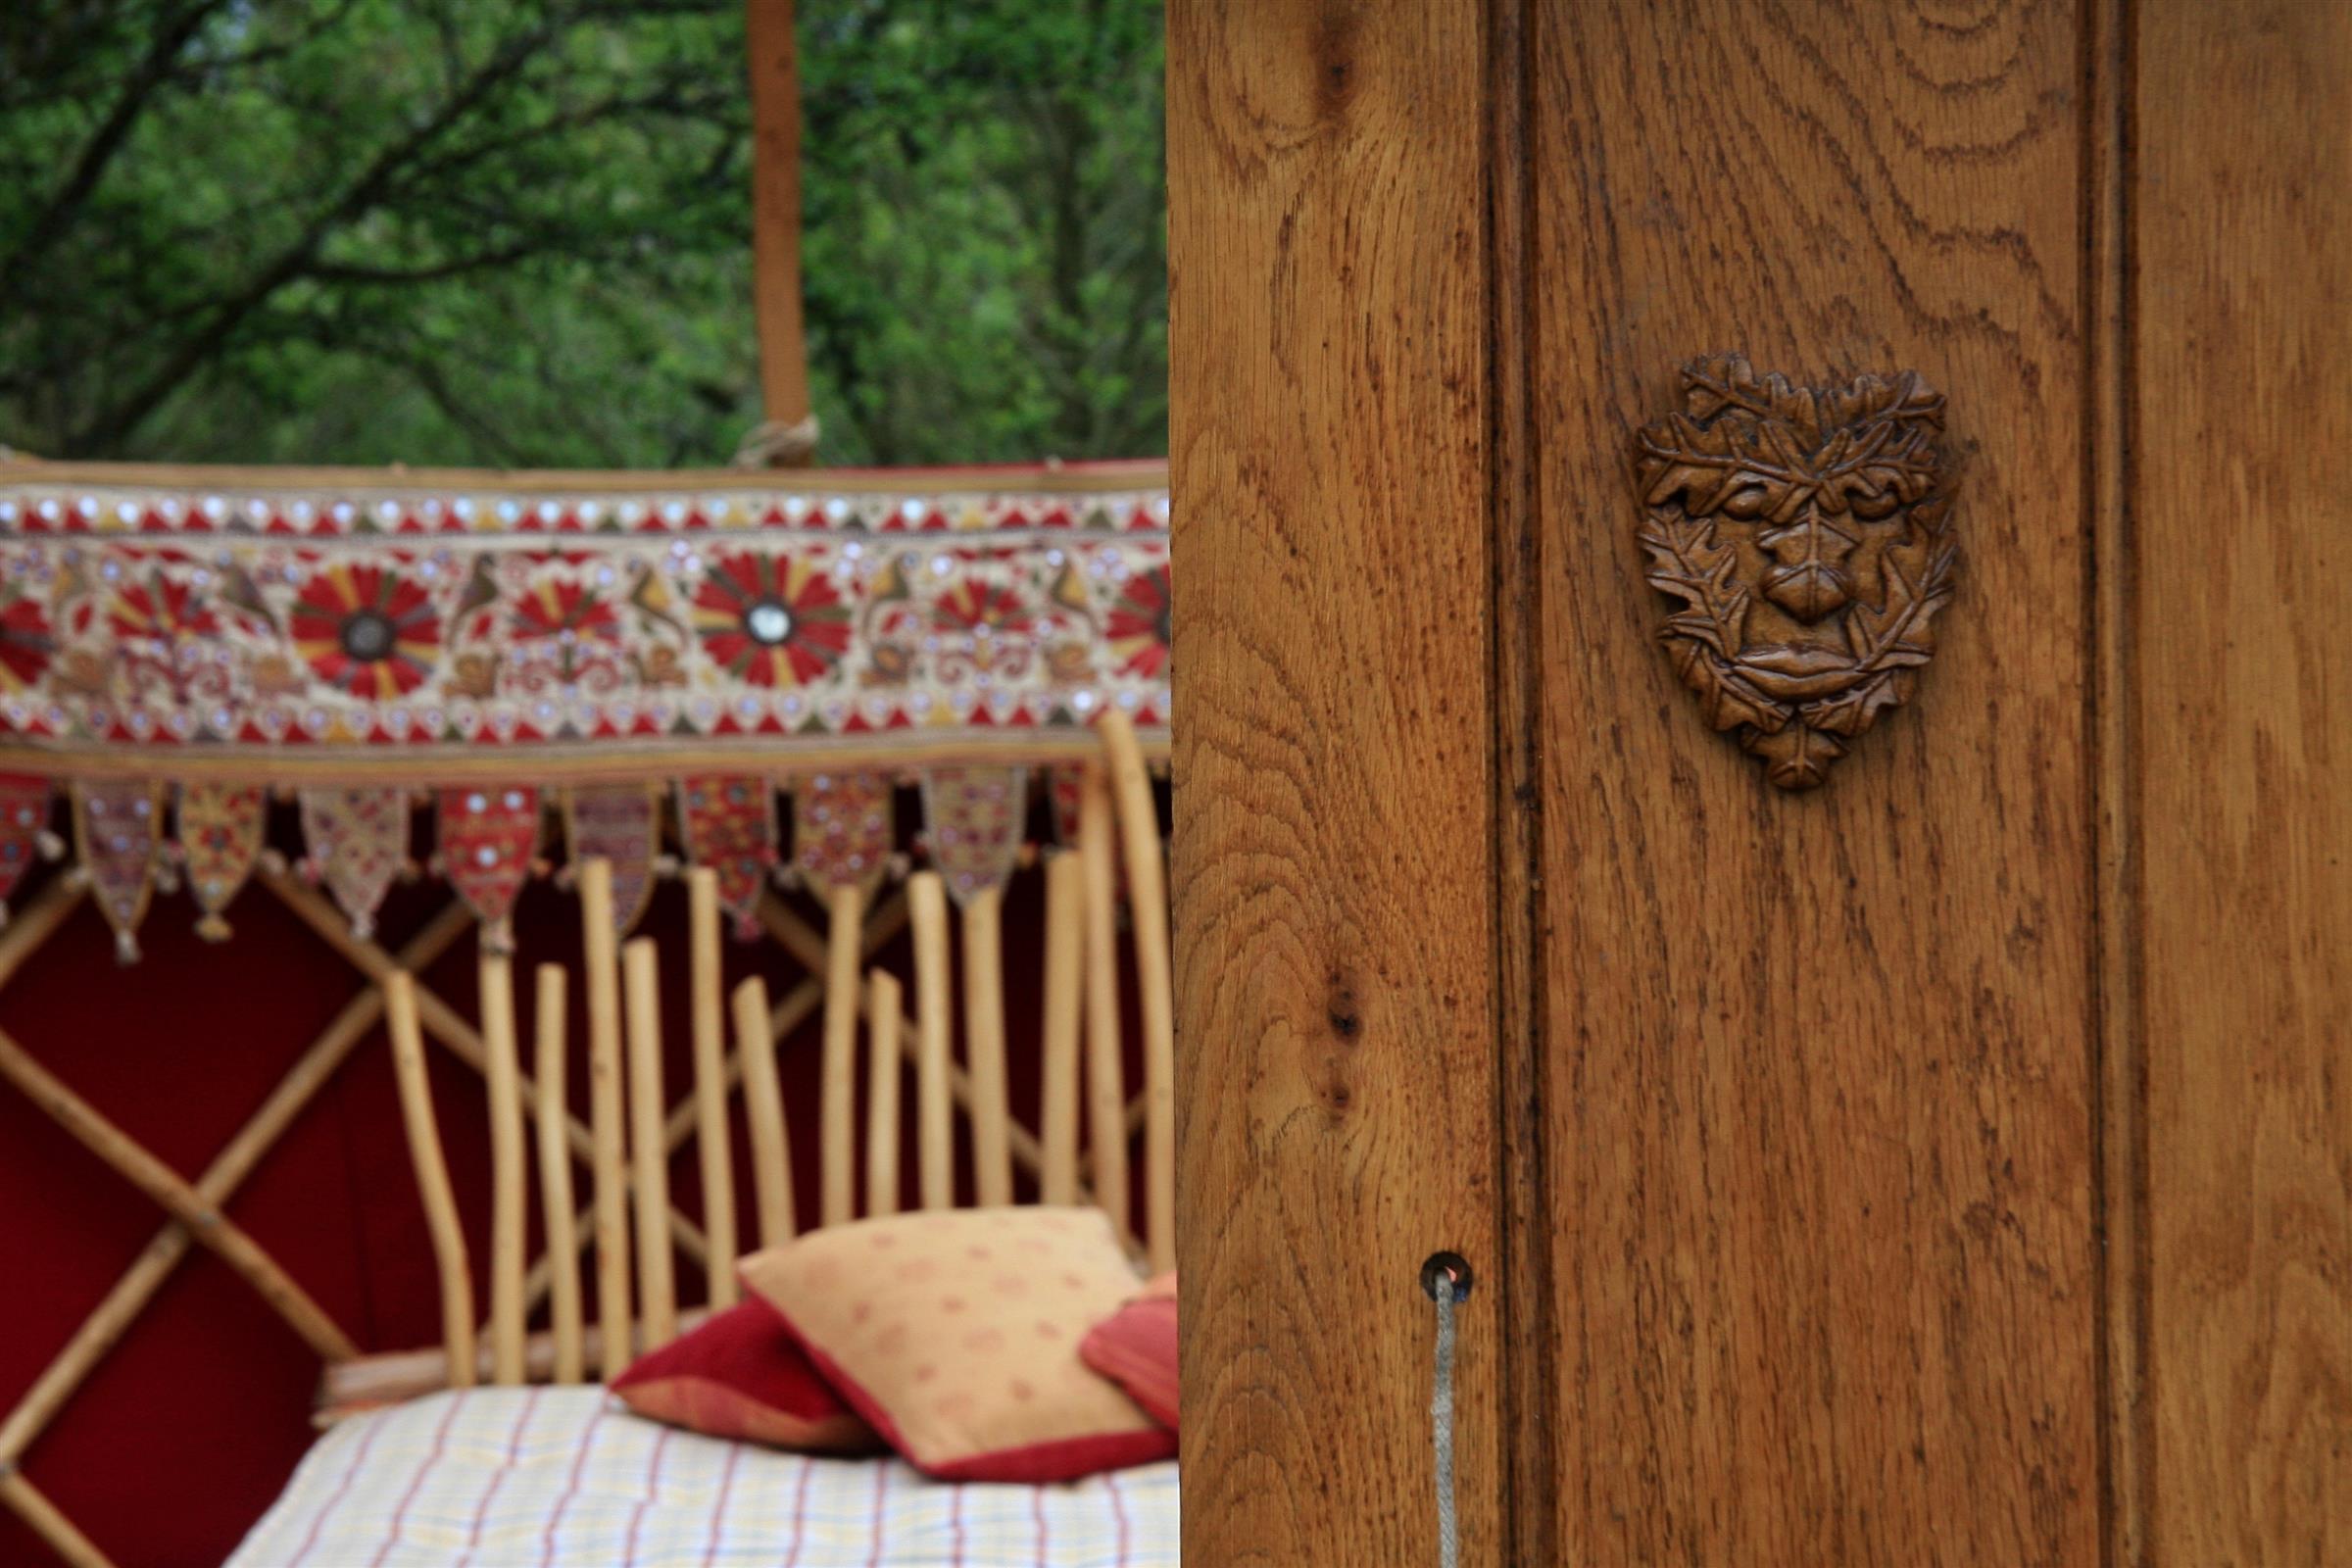 Green Man carving on the door of the yurt